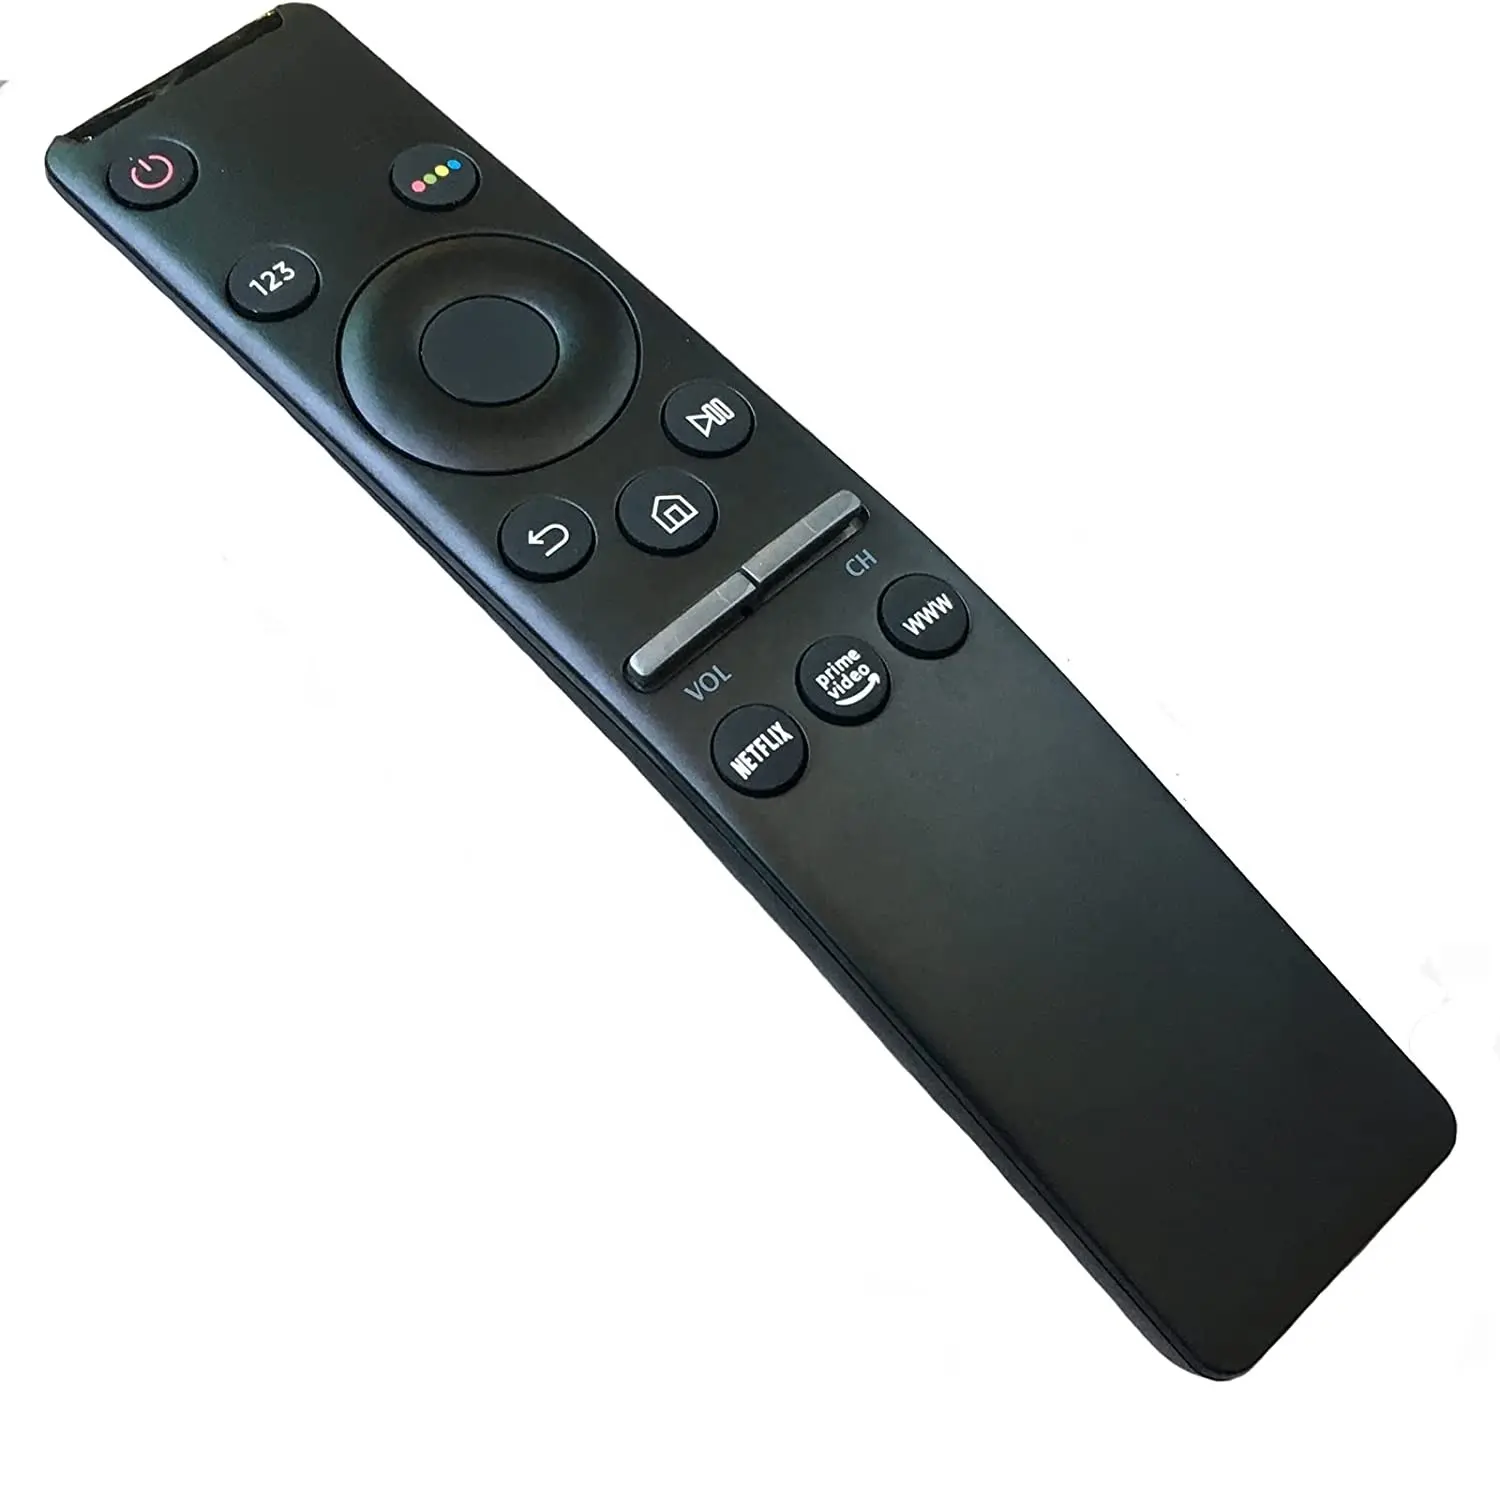 GAXEVER BN59-01310A BN59-01259B BN59-01259E Universal Remote Control Replacement for Samsung Smart TV